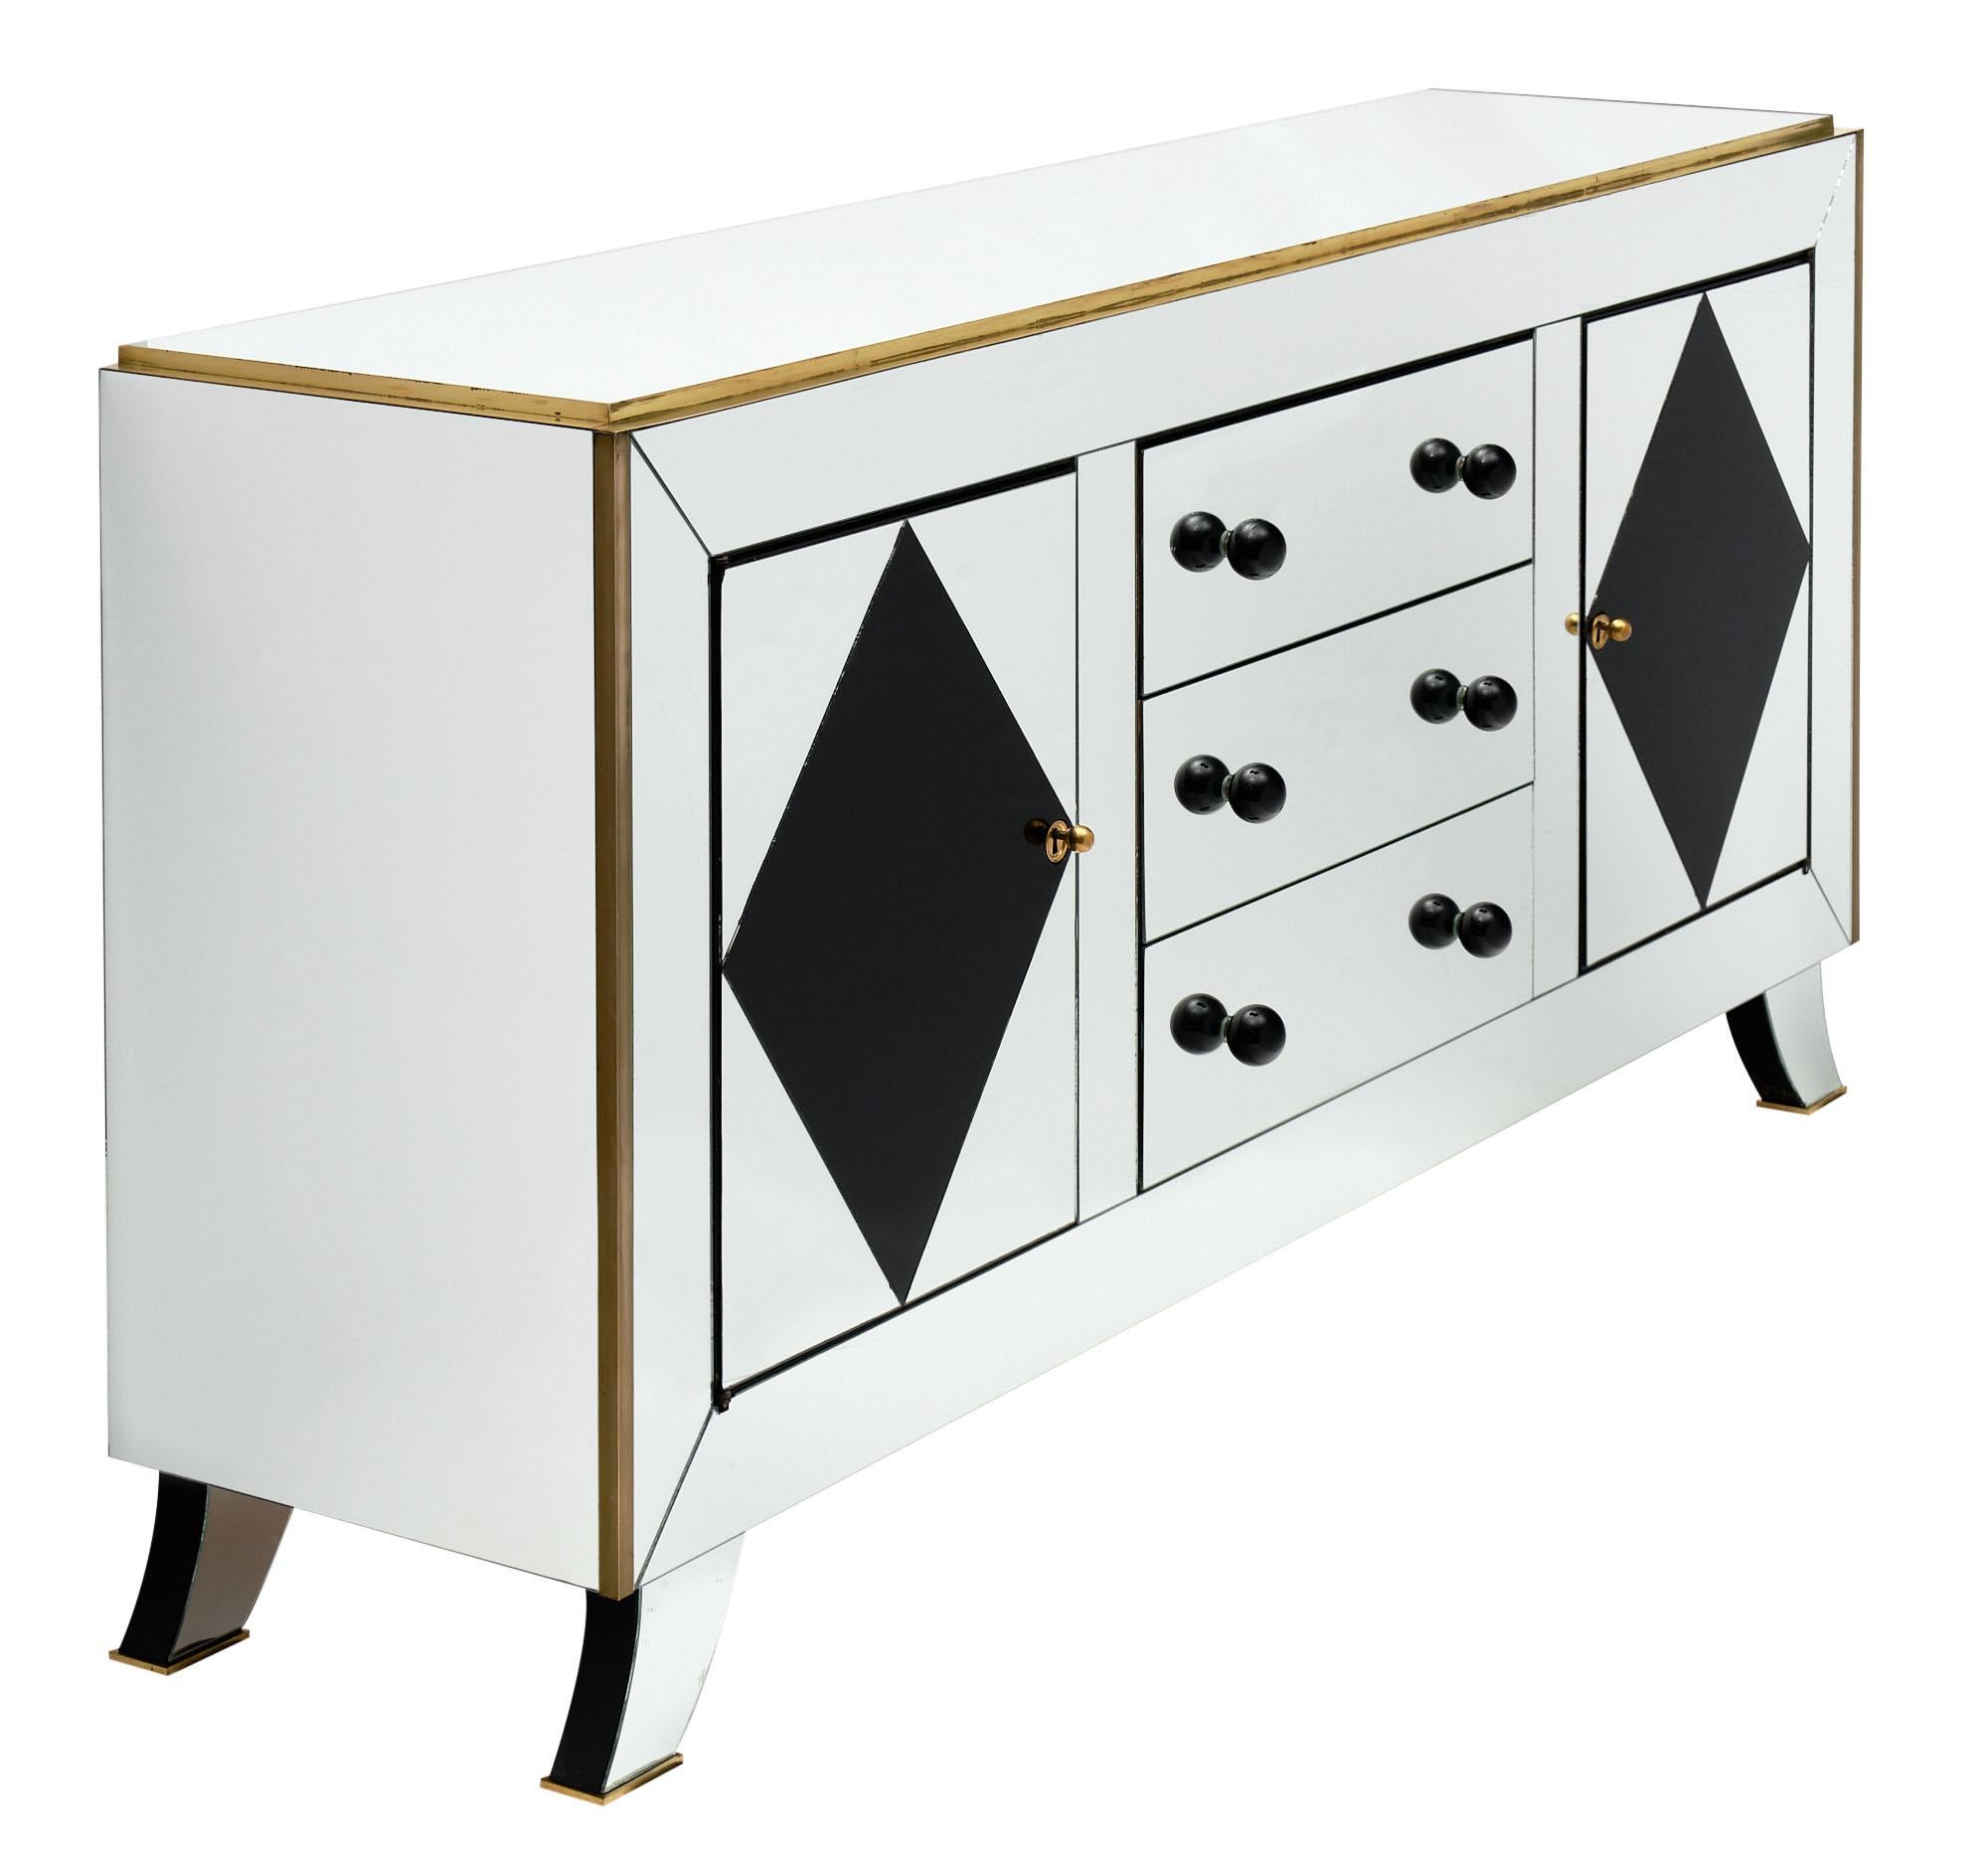 Art Deco period buffet with mirrored veneer over solid cherry wood. This French piece has gilt brass trims throughout as well. Murano glass knobs adorn the three central drawers and on each side a door opens outward with working locks and keys.